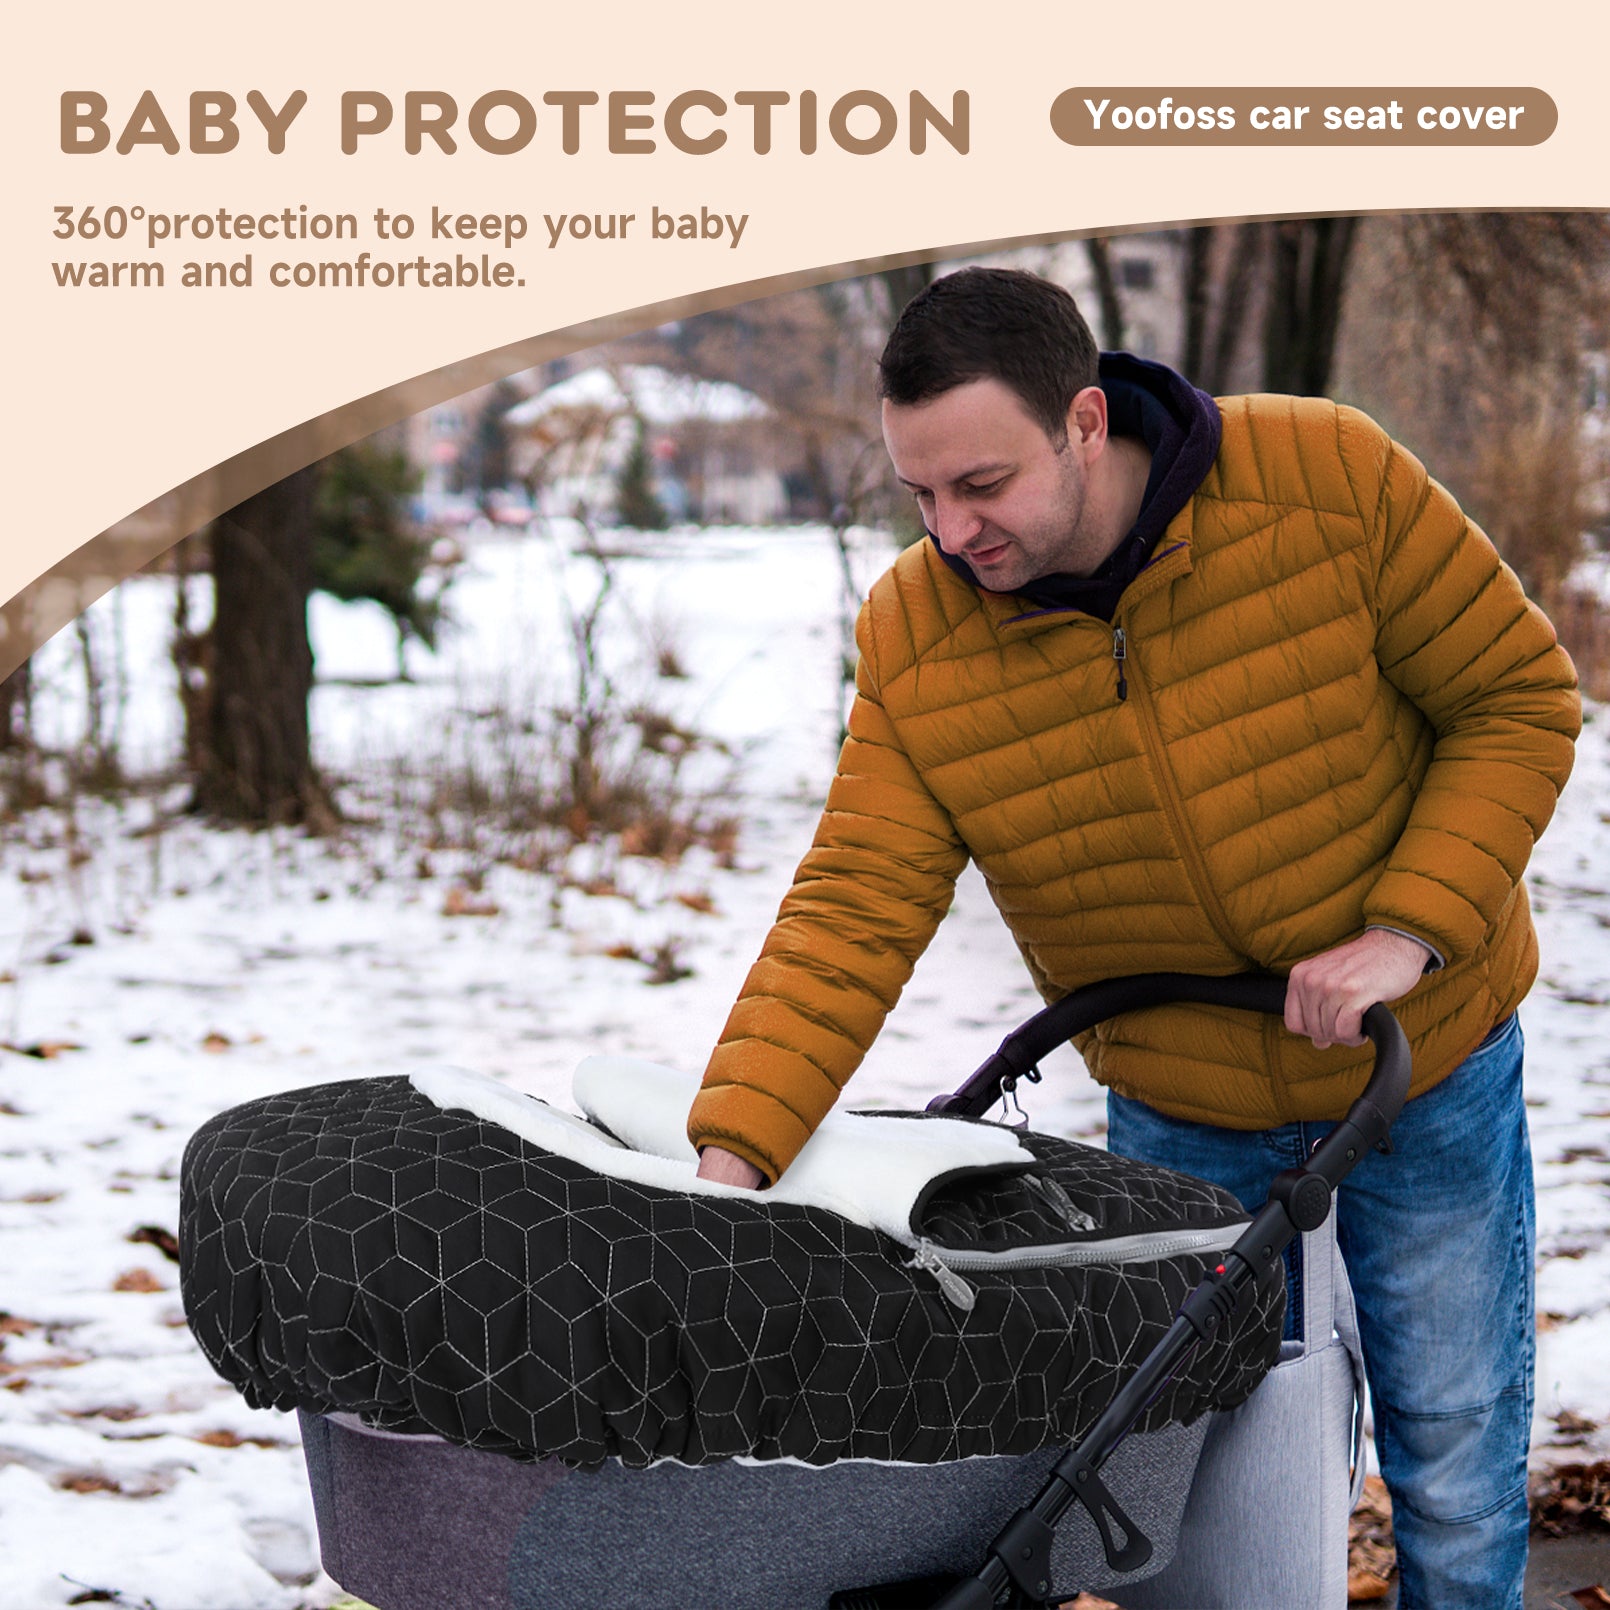 Baby Car Seat Cover Winter Carseat Canopies Cover to Protect Baby from Cold Wind, Super Warm Plush Fleece Baby Carrier Cover for Infant Boys Girls